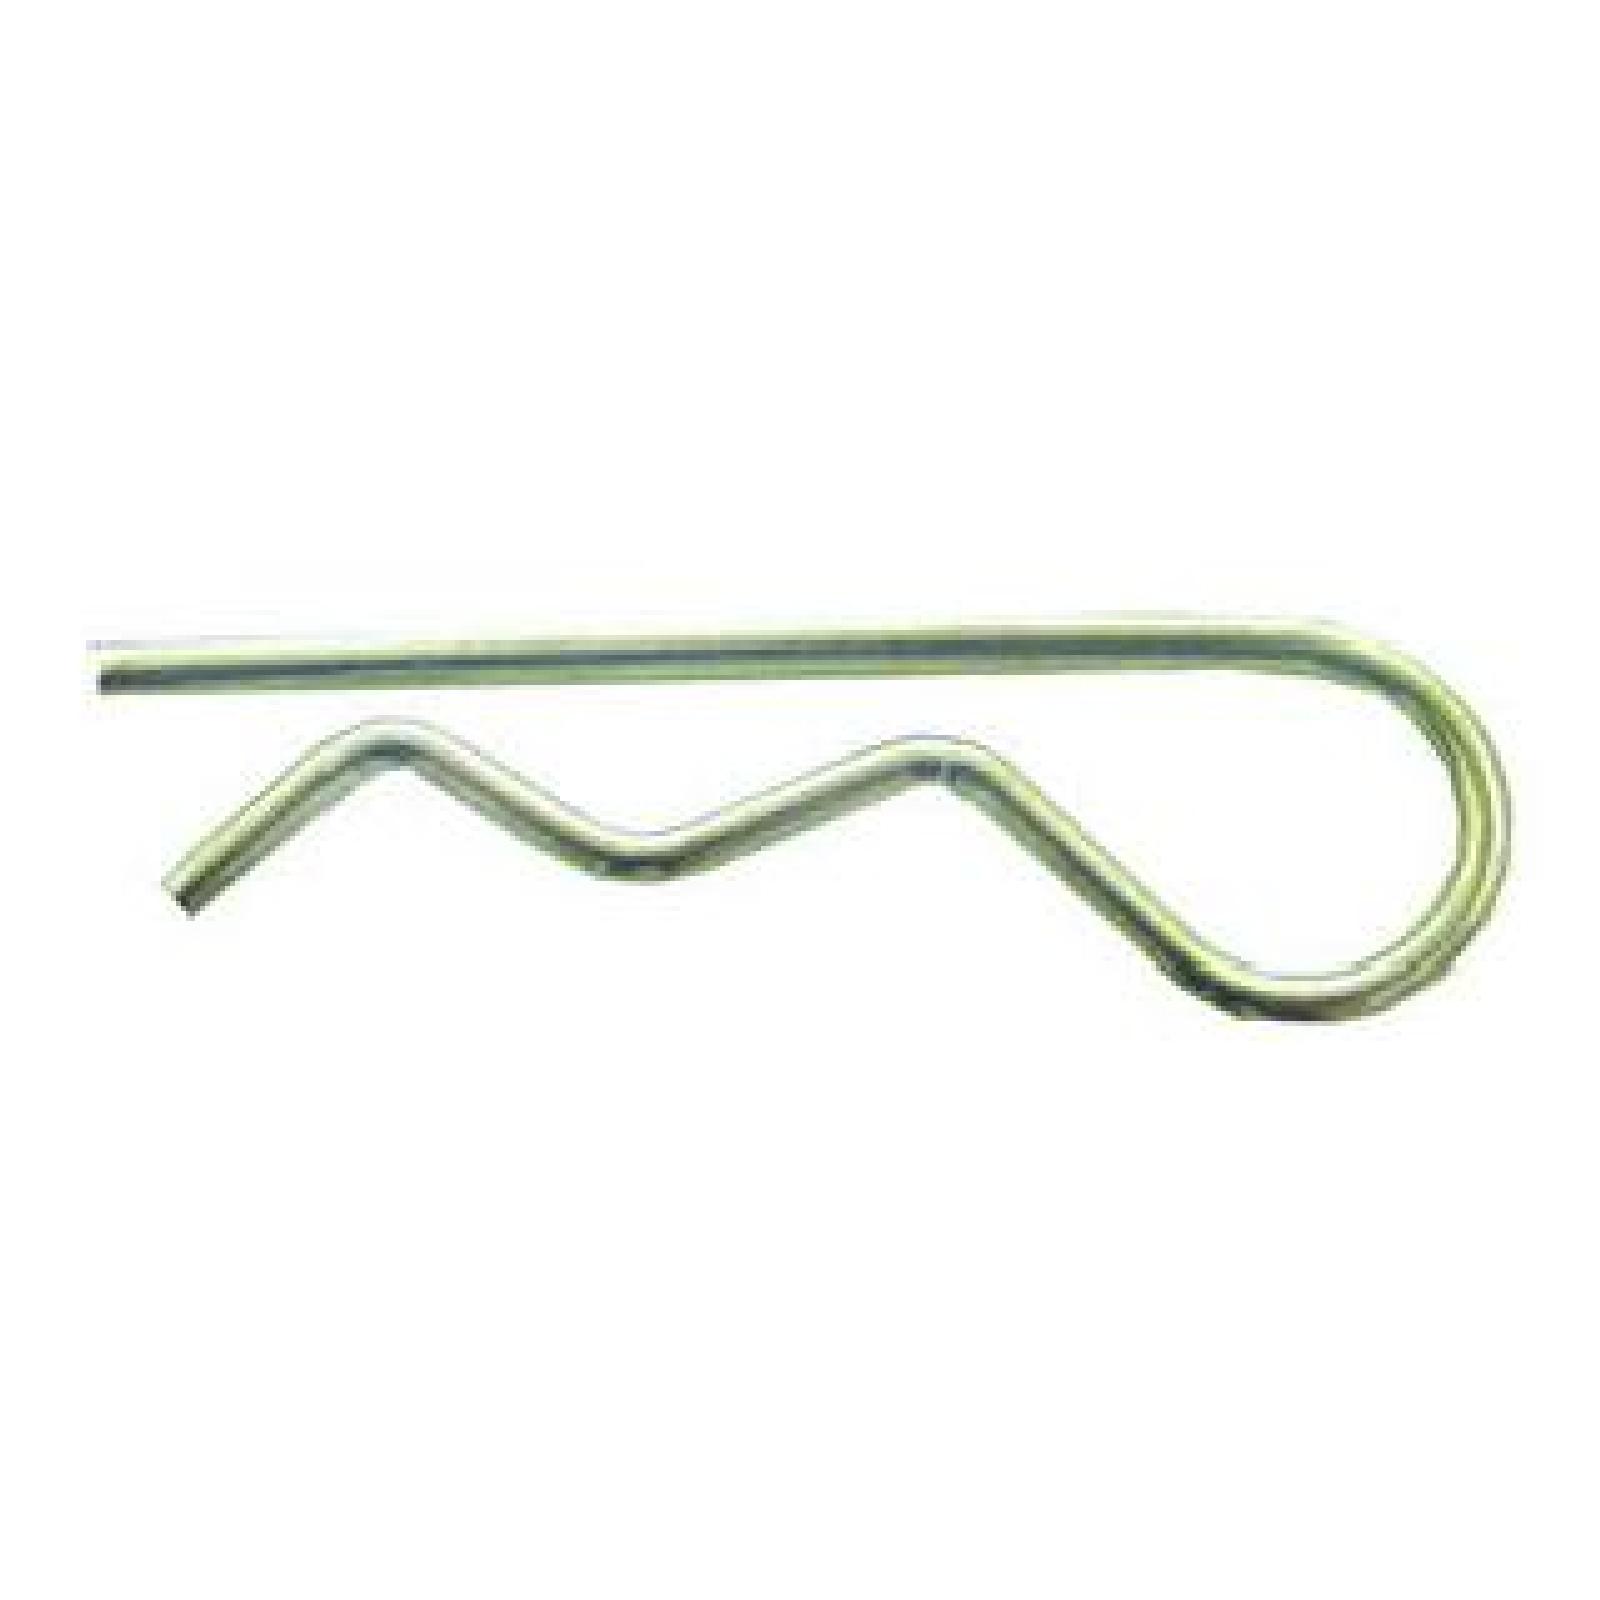 HAIR PIN CLIP .062 X 1 9/ part# 02-419 by Oregon - Click Image to Close